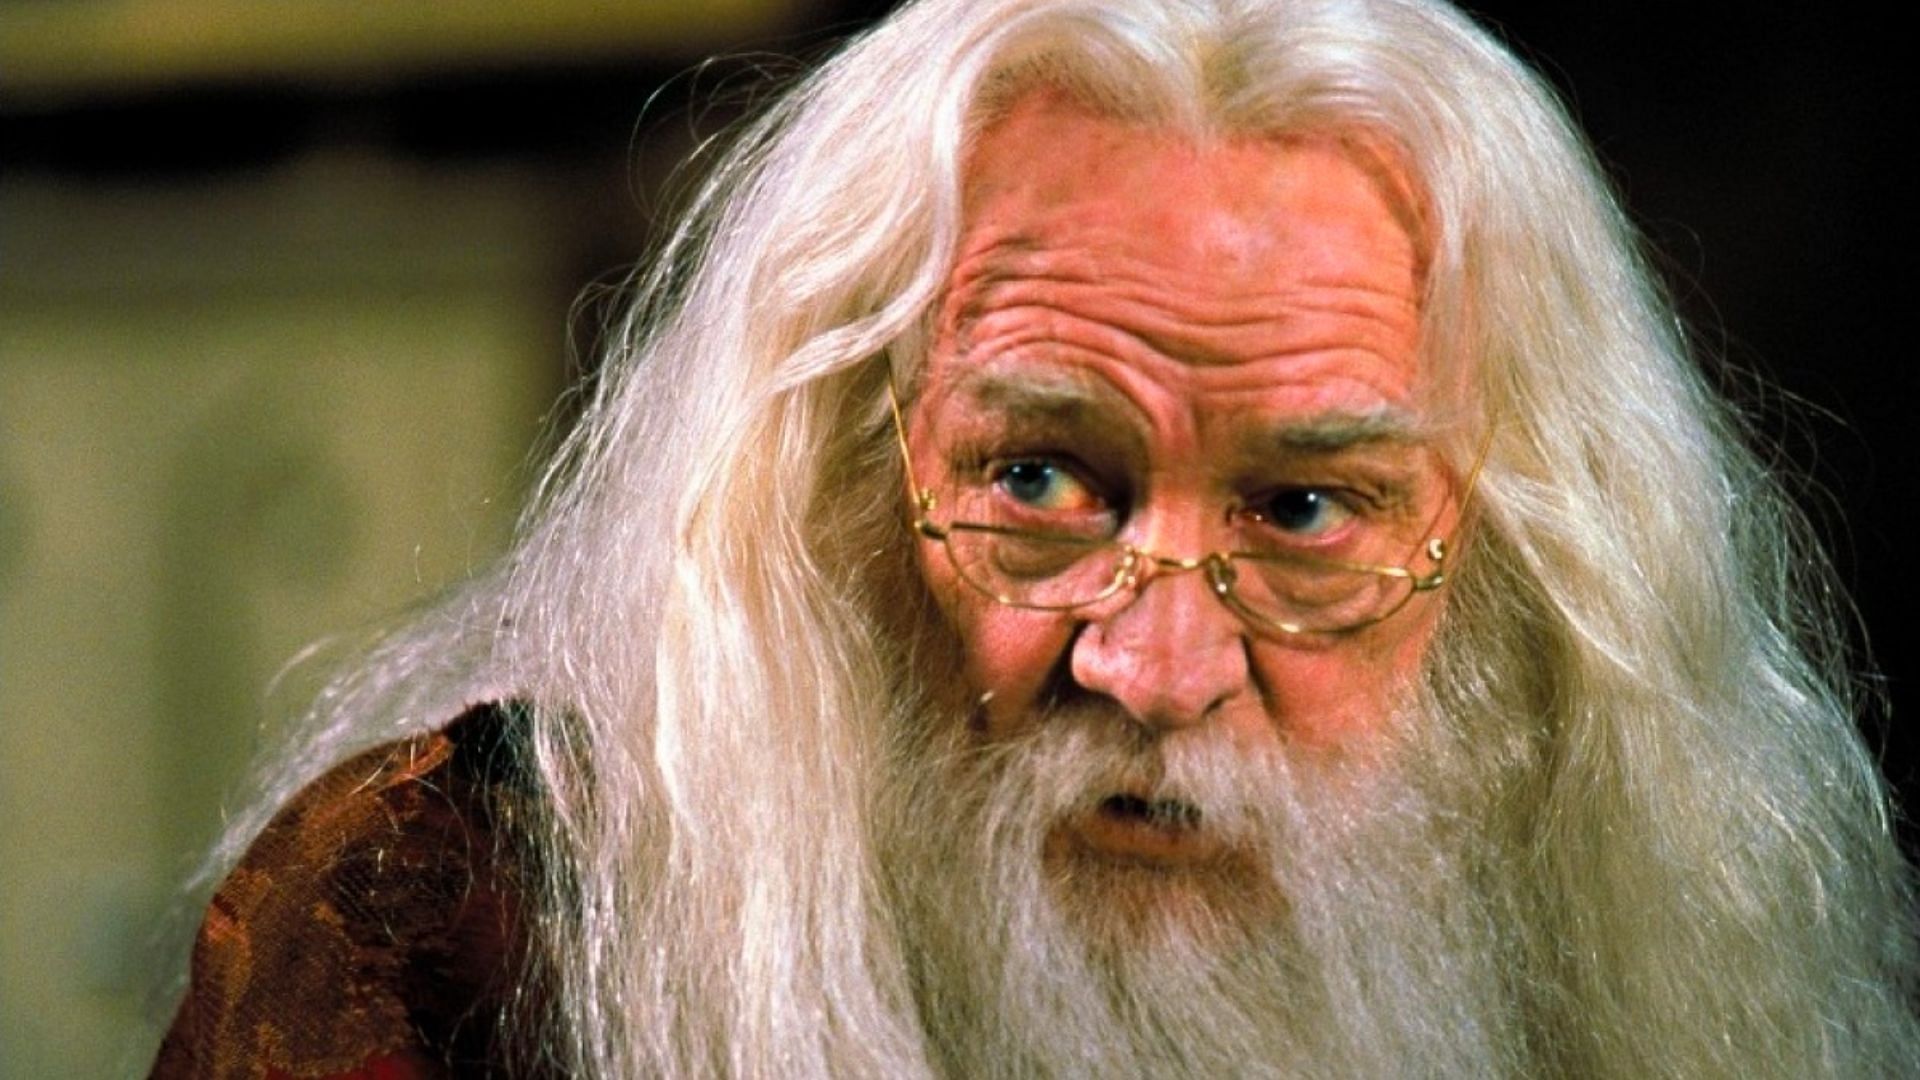 Dumbledore played by Sir Richard Harris in Harry Potter (Image via Vocal Media)